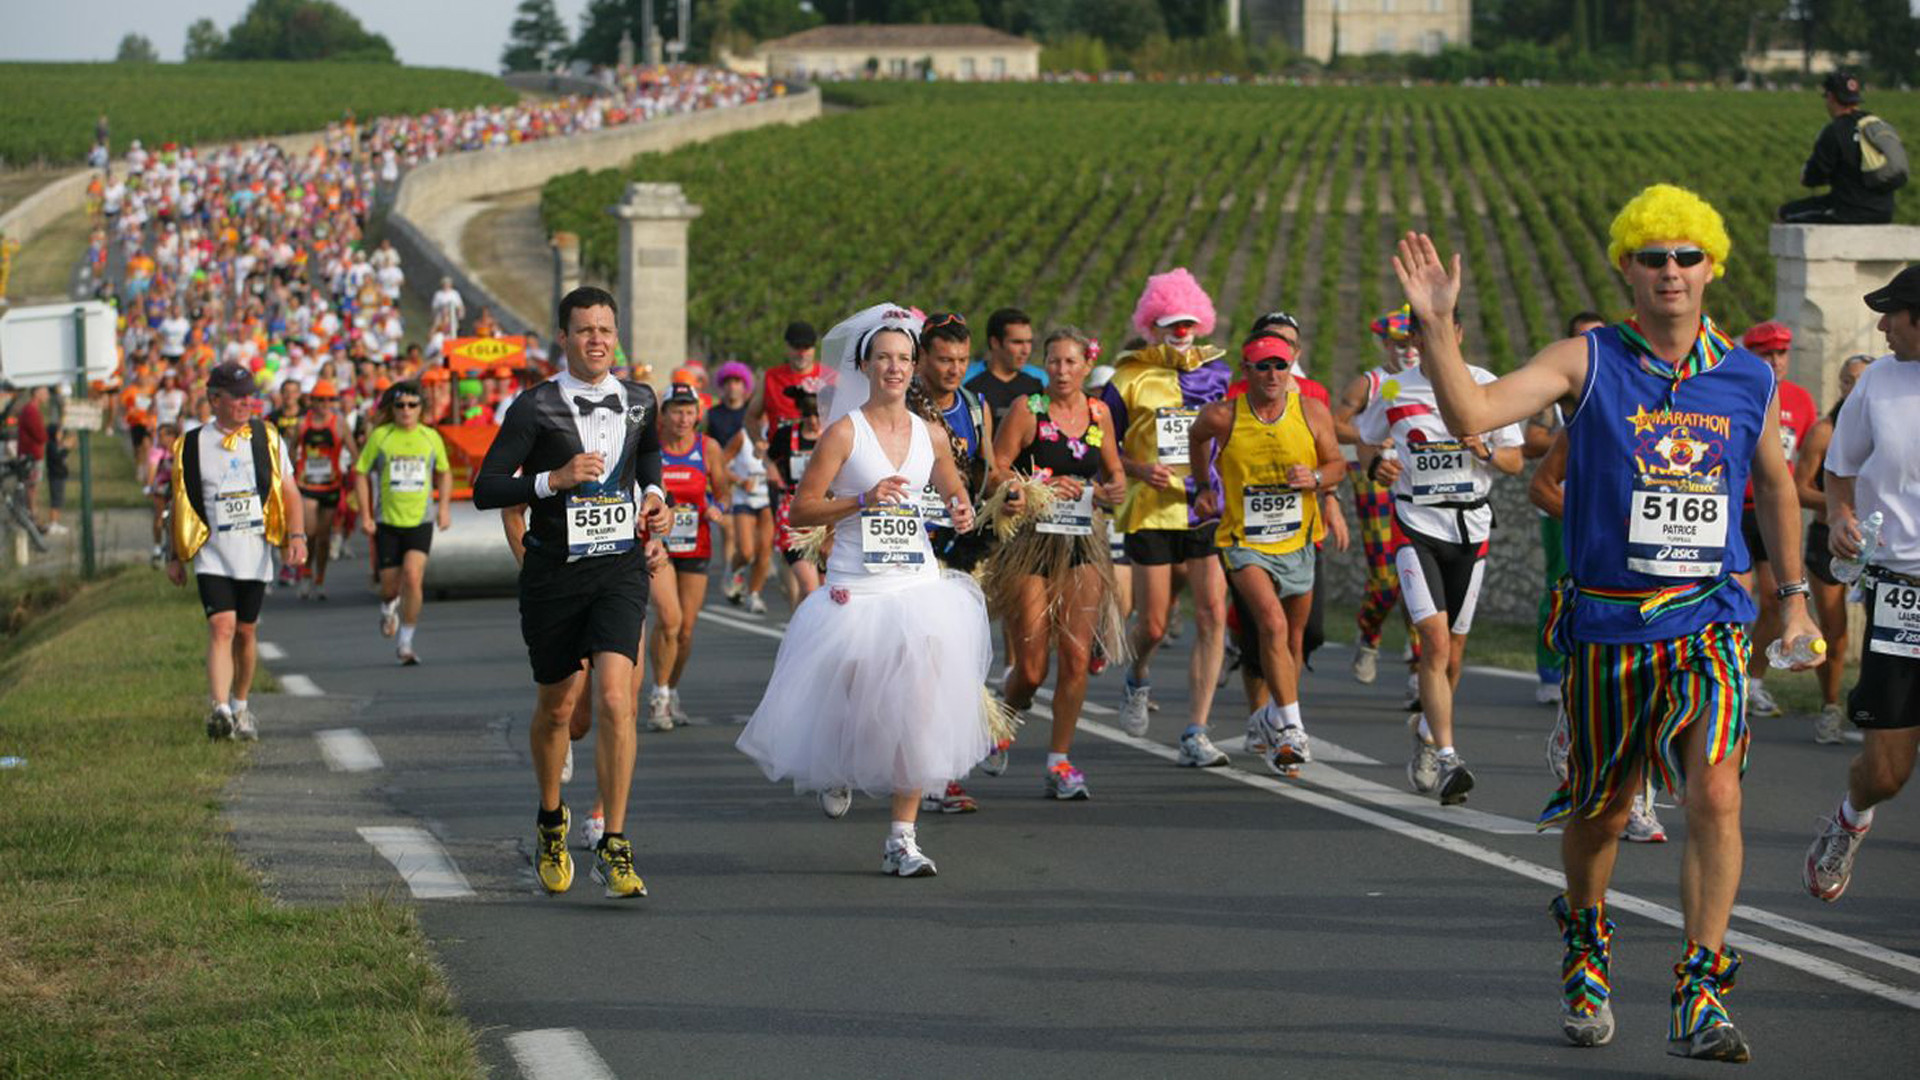 Organizers of the annual Marathon du MÃ©doc have announced that the 36th edition of the race, due to be held in September, will be postponed to 2021